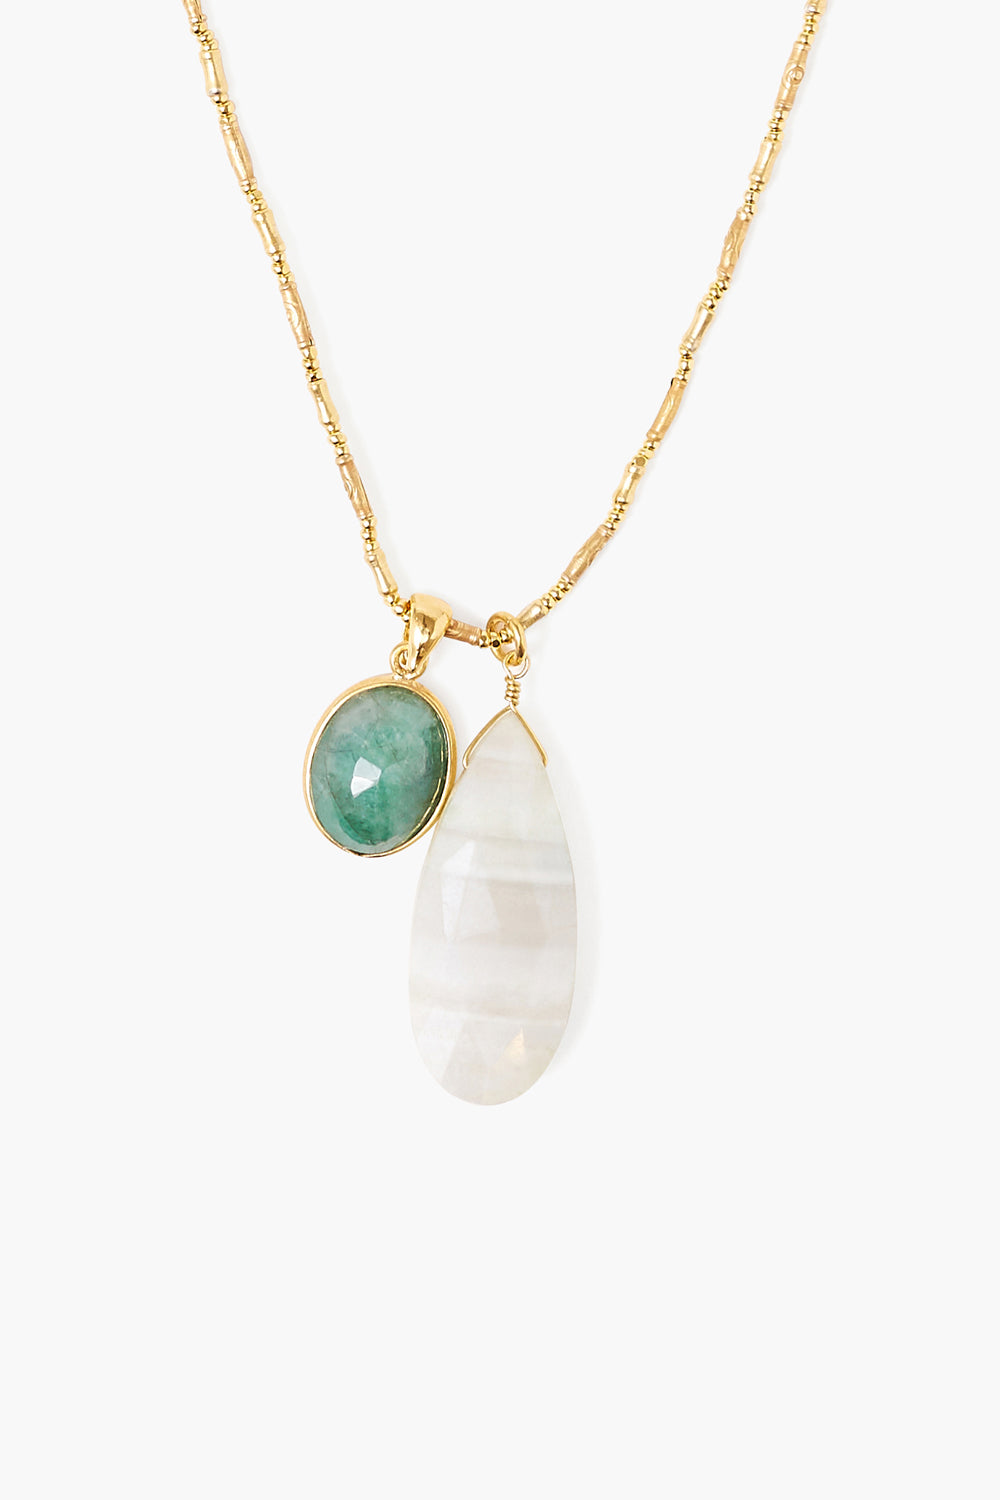 EMERALD MIX GEM/STONE CHARM NECKLACE - Kingfisher Road - Online Boutique